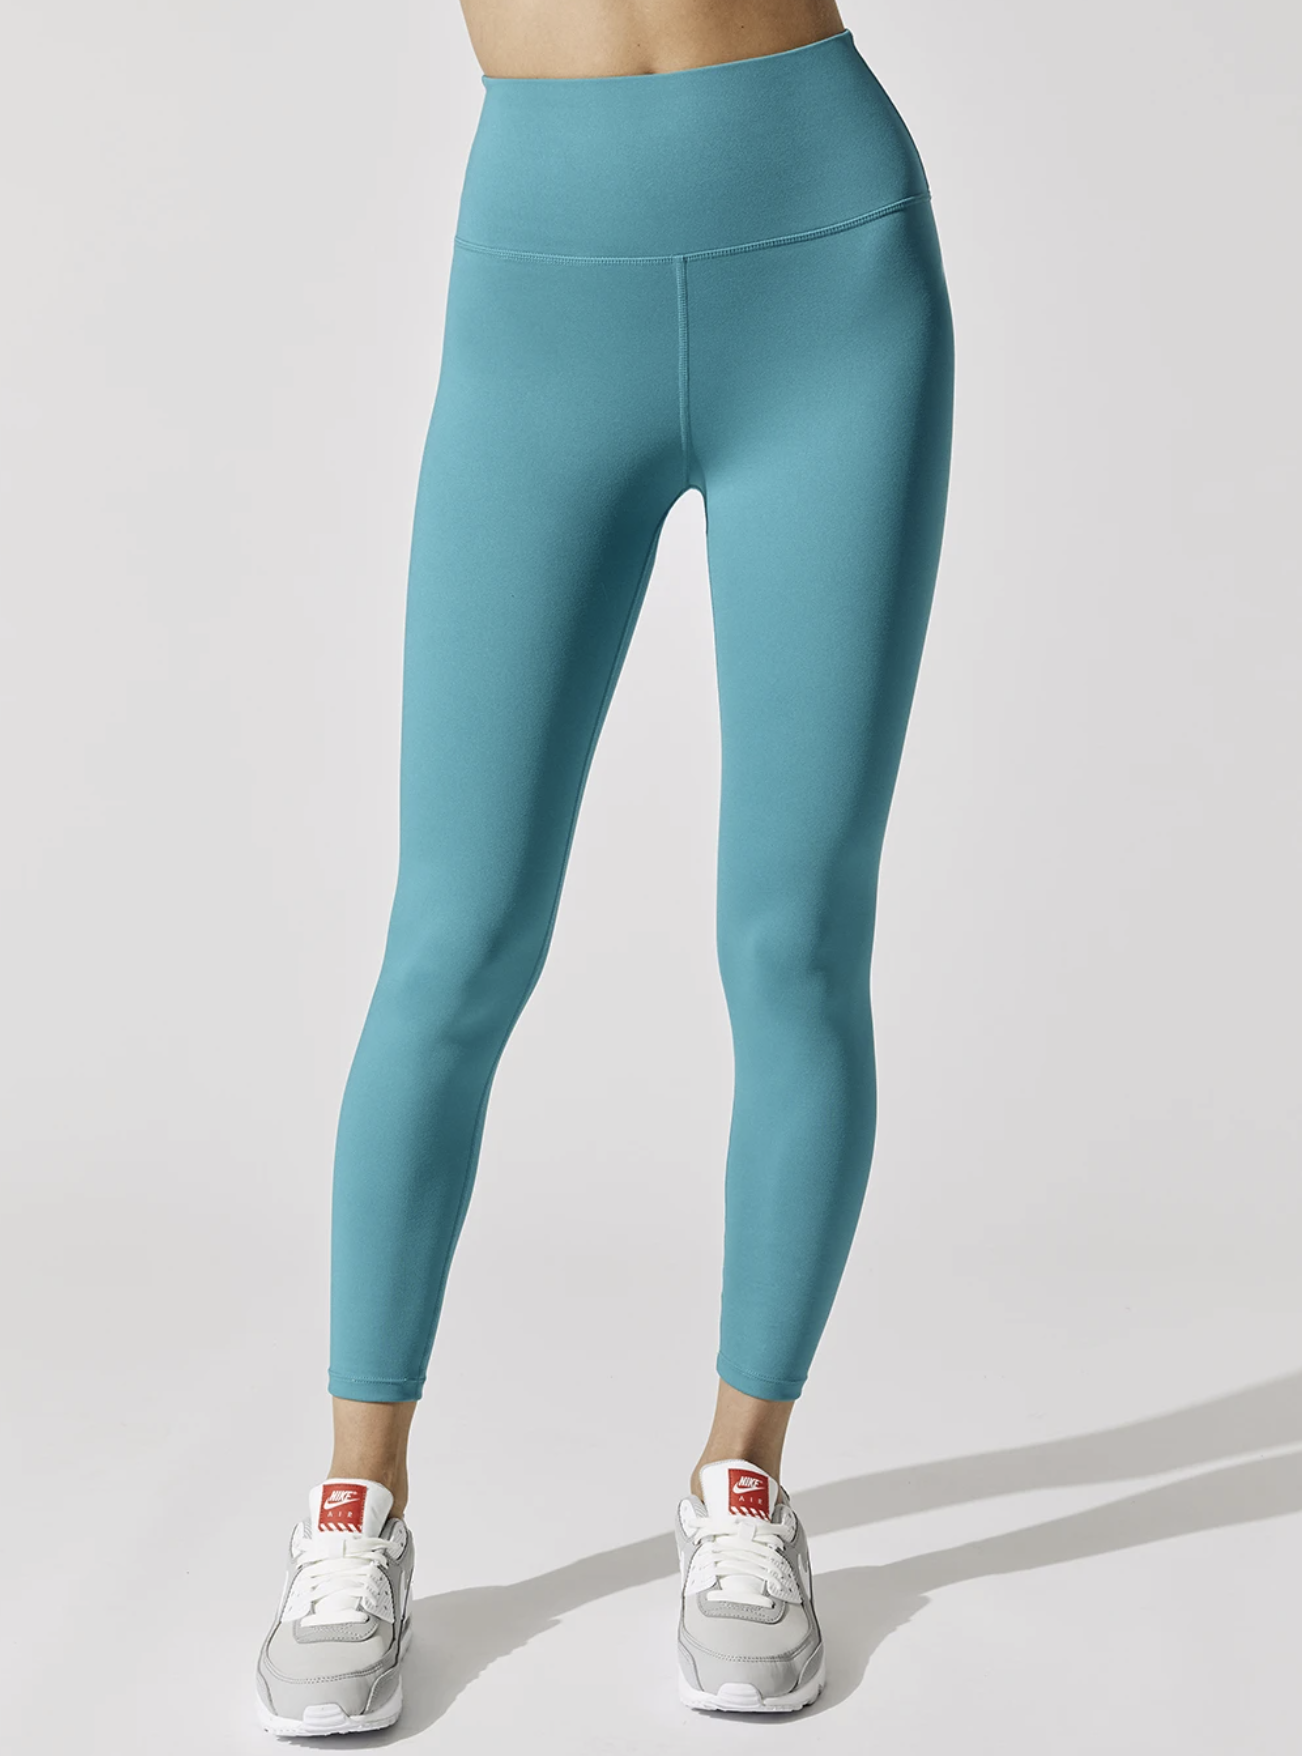 Brands – Where to Buy Leggings and Workout Tights